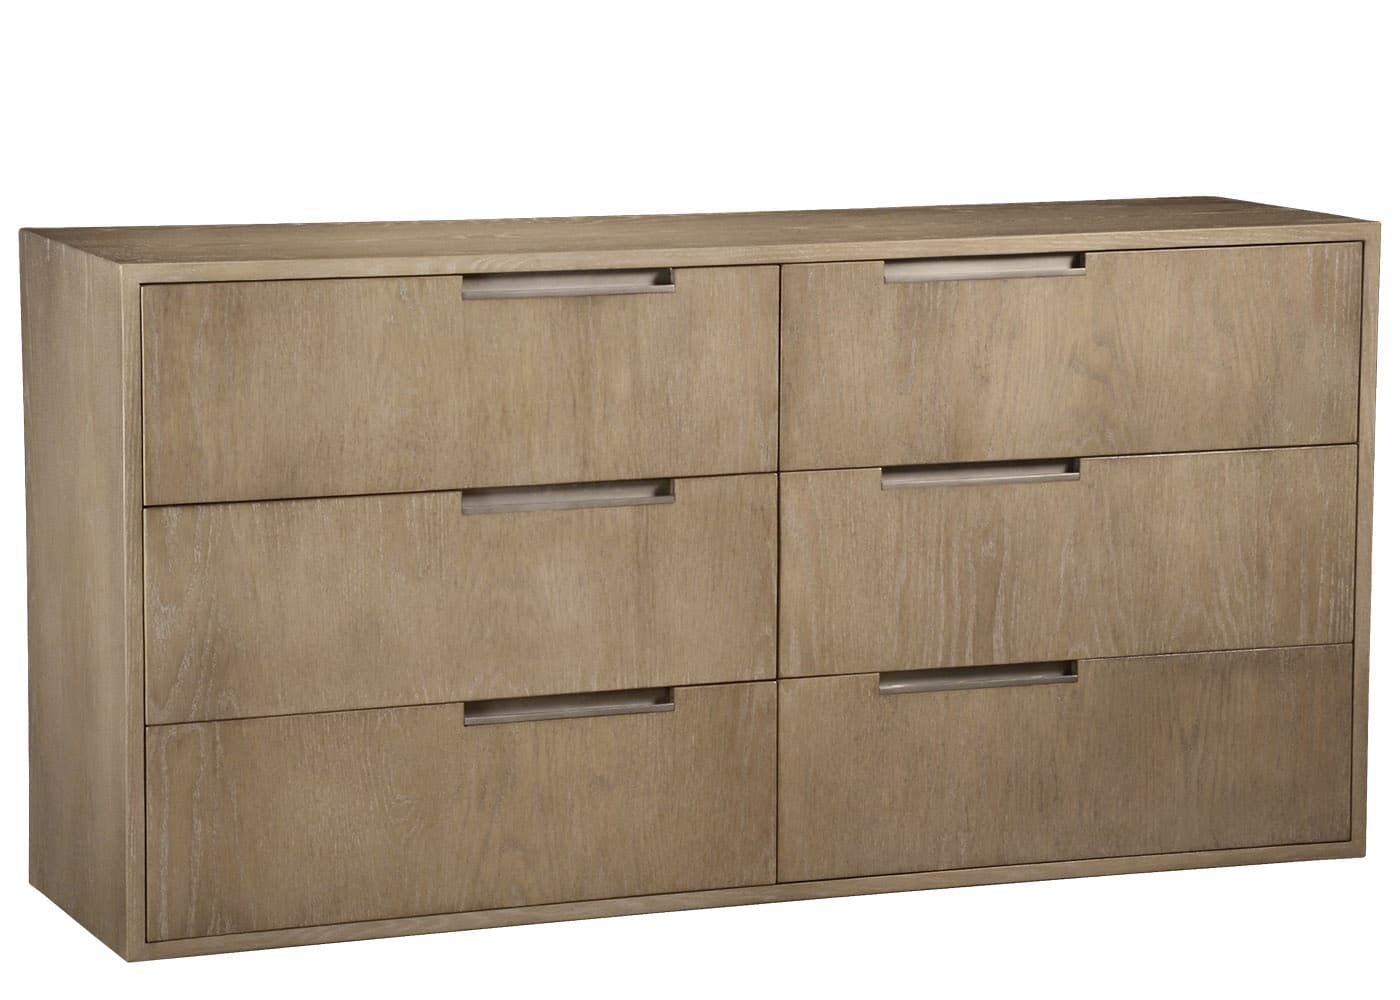 Baron contemporary chest of drawers or dresser